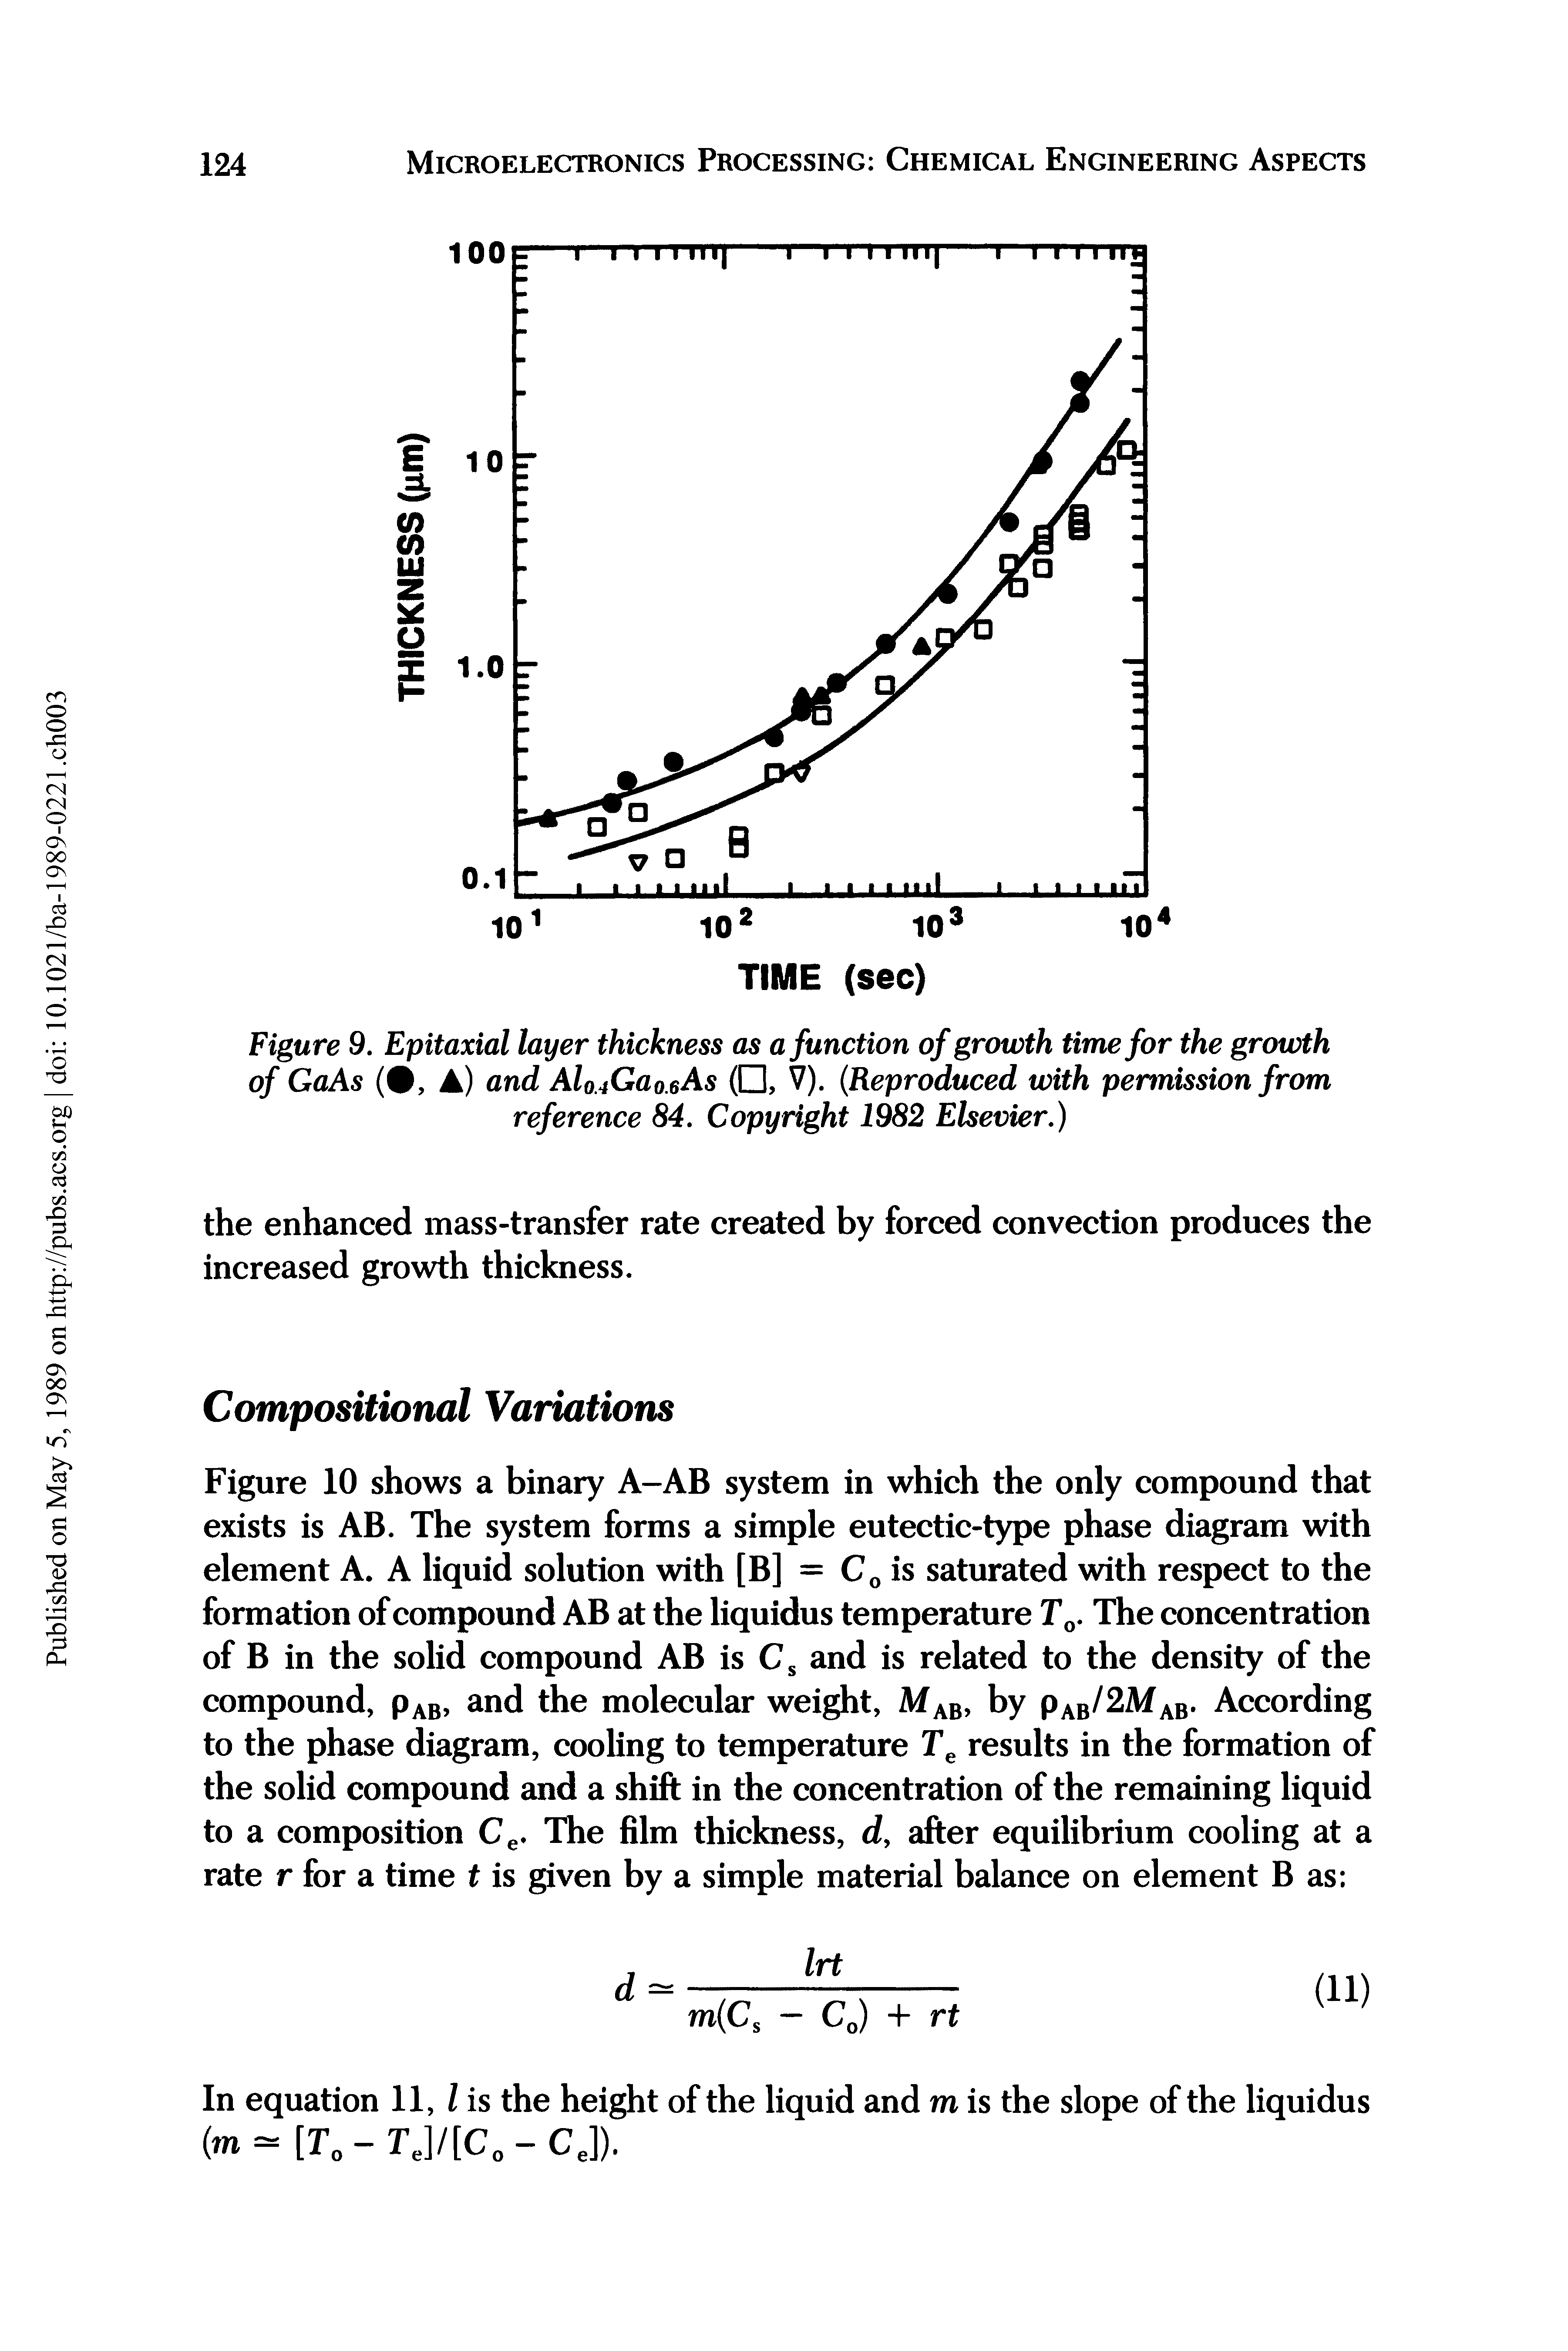 Figure 9. Epitaxial layer thickness as a function of growth time for the growth of GaAs (, A) and Al0.4Ga0.eAs ( , V). (Reproduced with permission from reference 84. Copyright 1982 Elsevier.)...